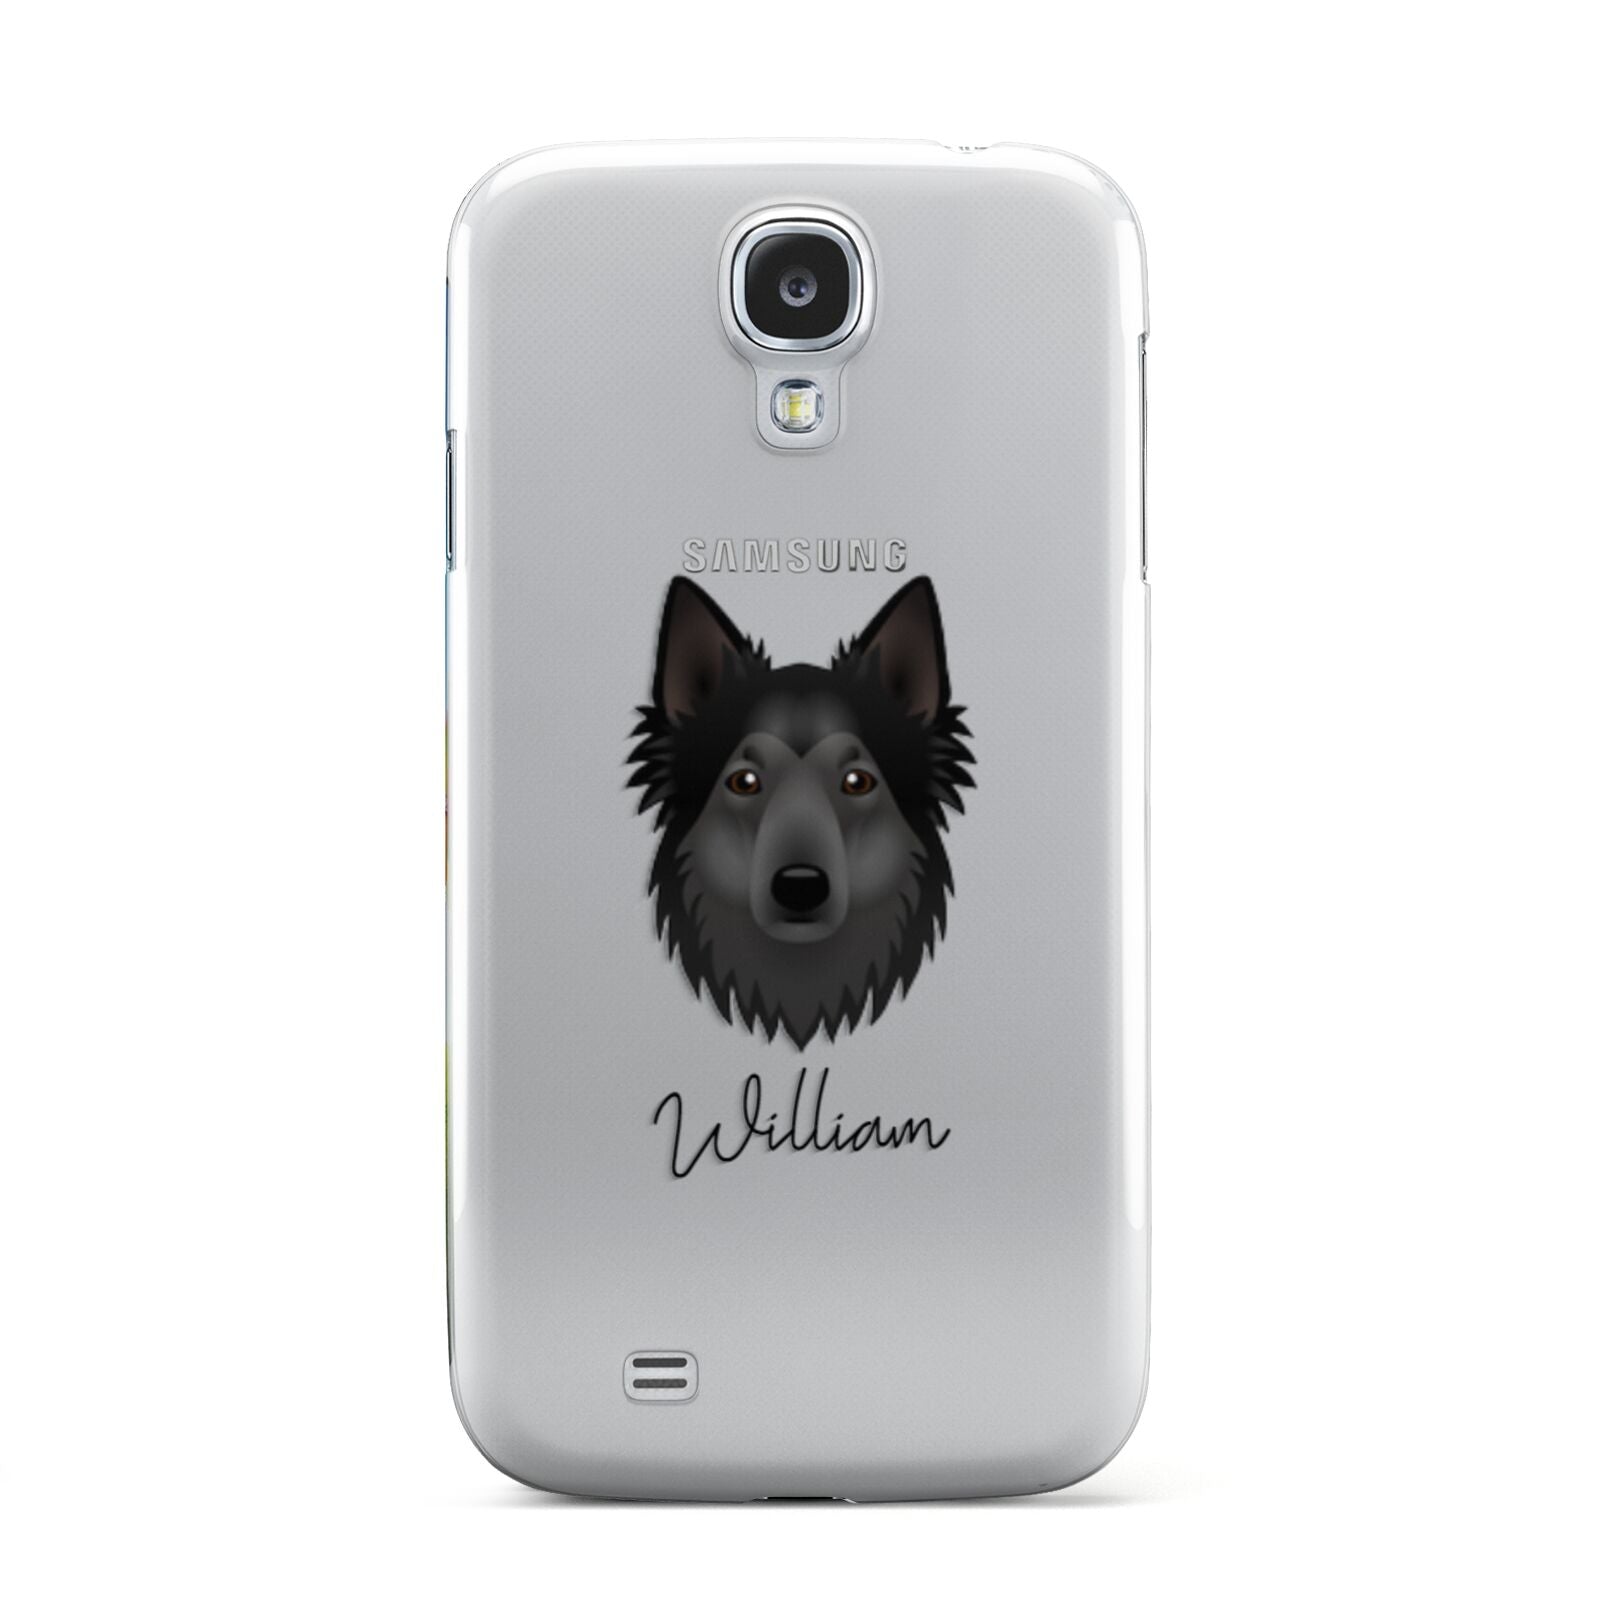 Shollie Personalised Samsung Galaxy S4 Case